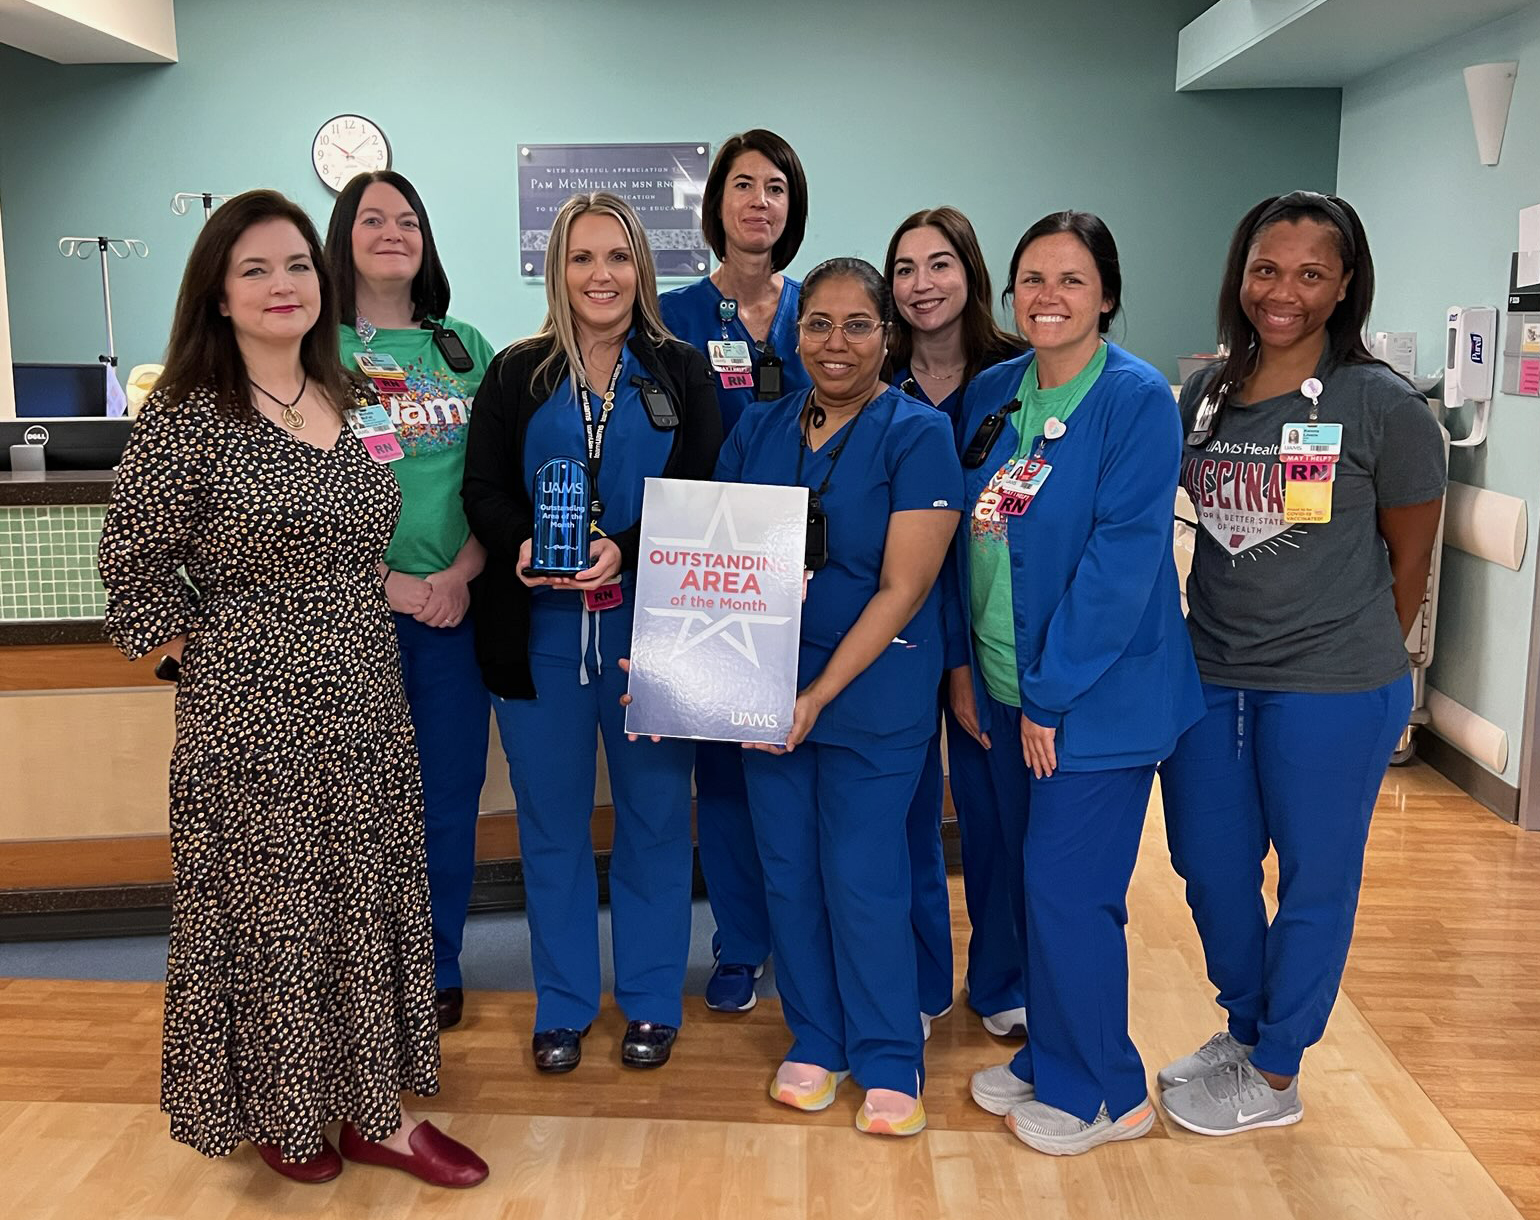 F5/H5 - Neonatal Intensive Care Unit (NICU), Outstanding Area of the Month for June 2023